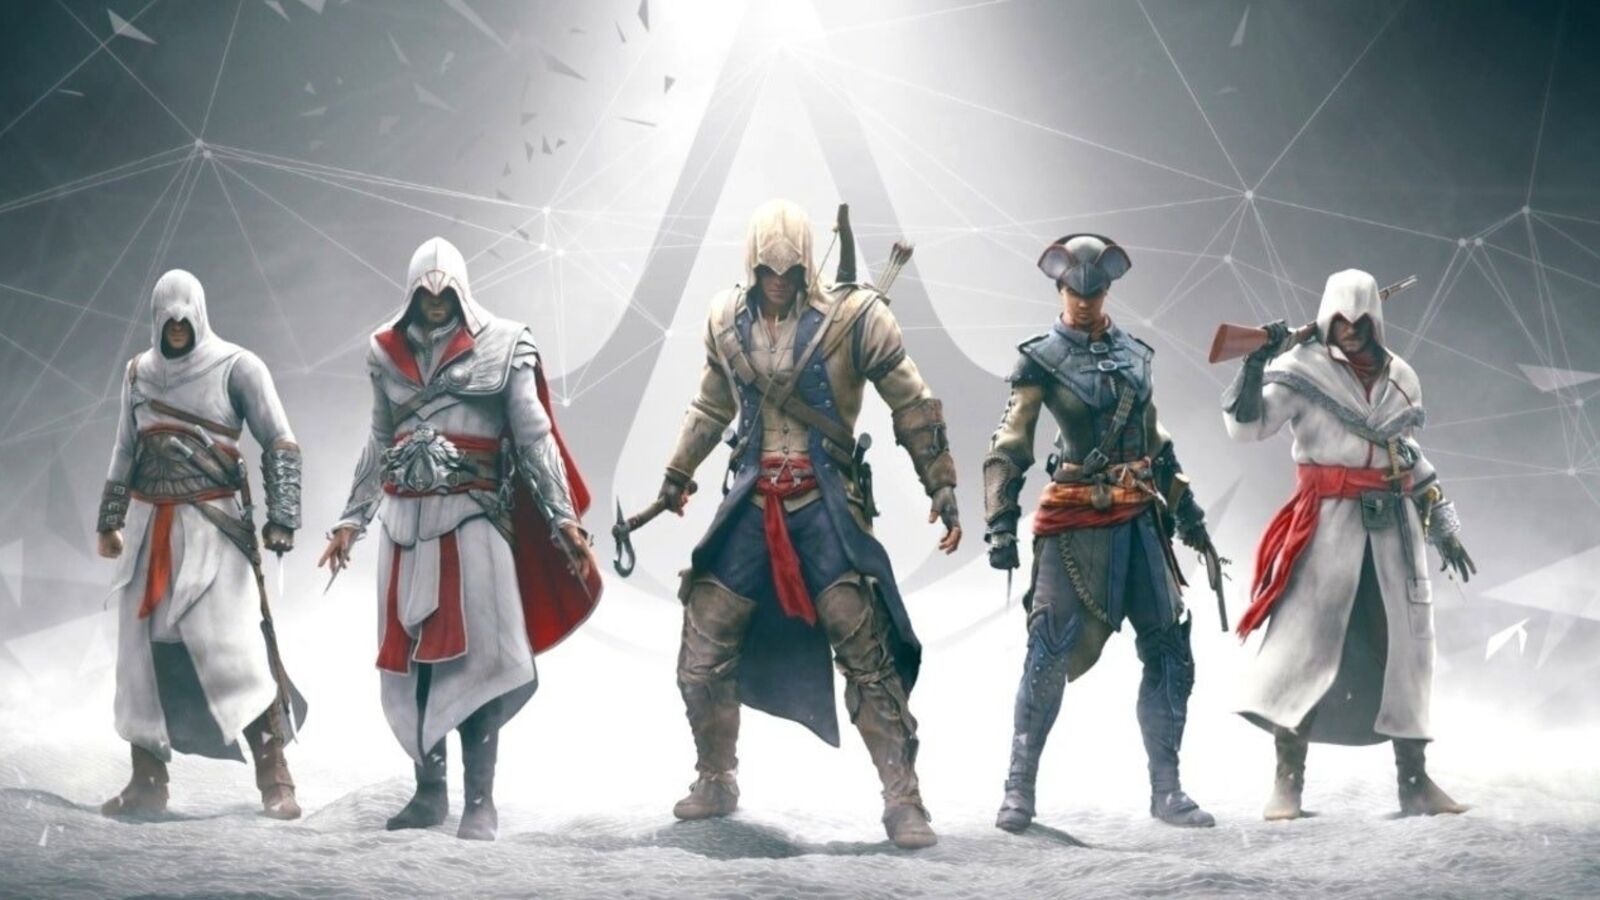 Exclusive - Ubisoft is Going All In on Assassin's Creed With 4